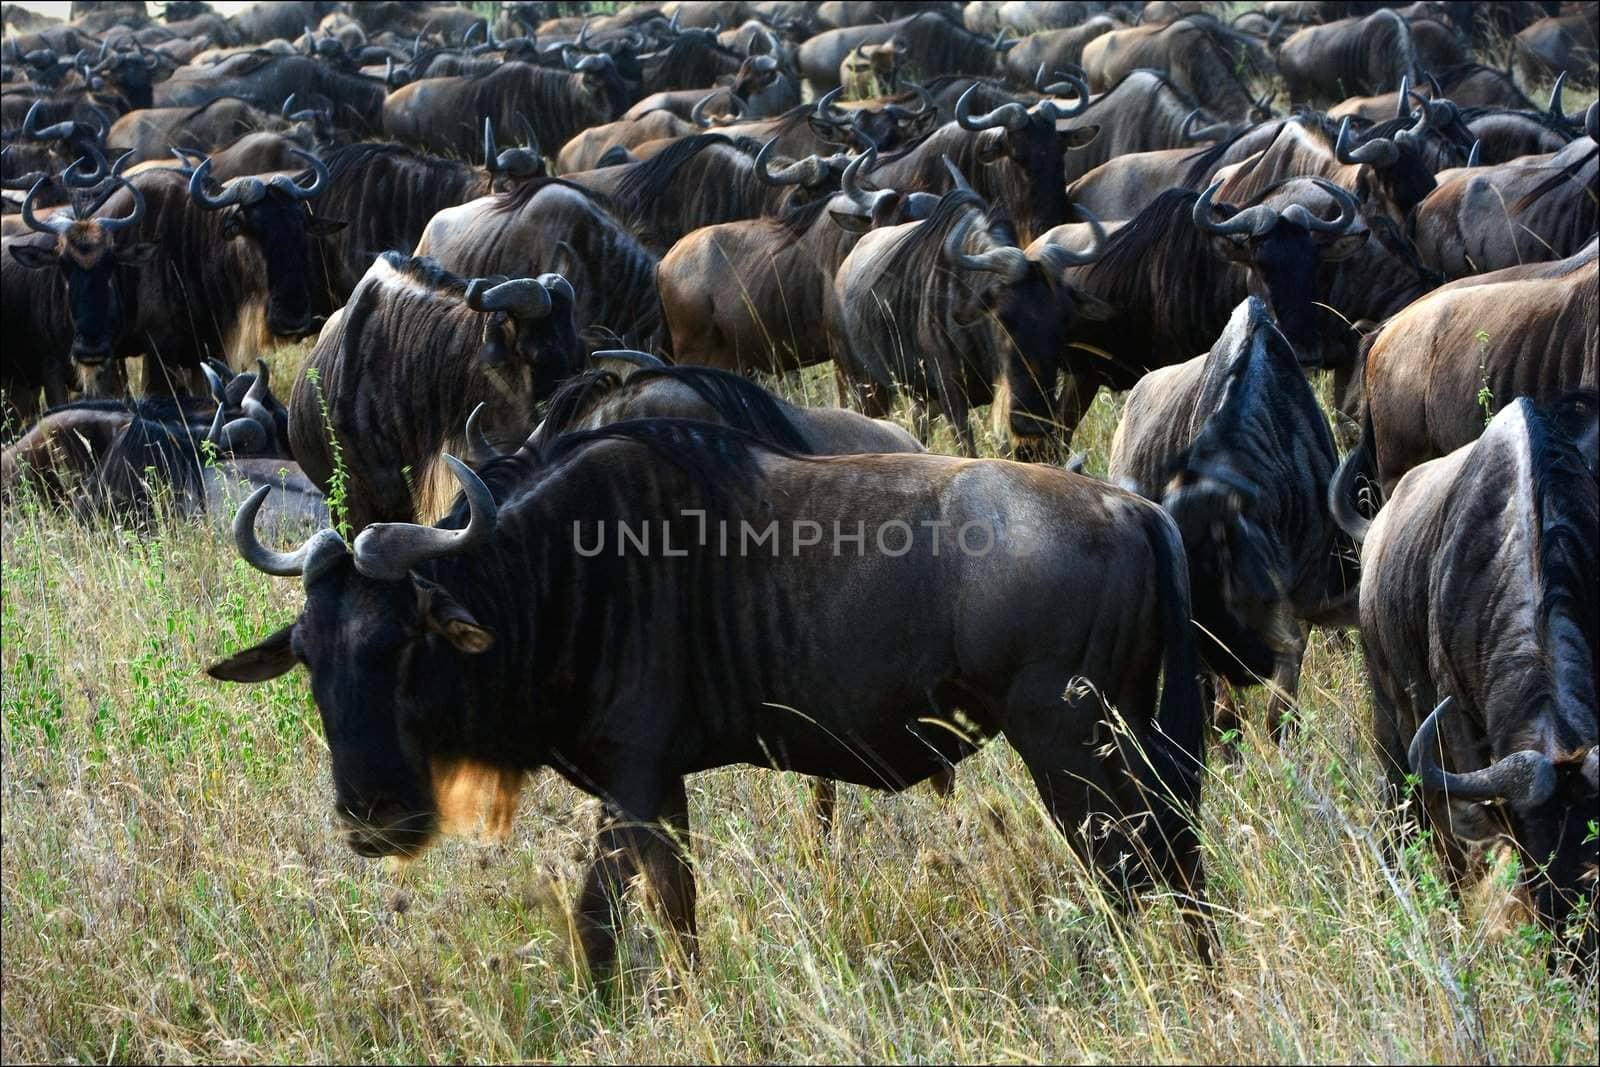 The herd of gnu antelopes is grazed on a faded grass of savanna.